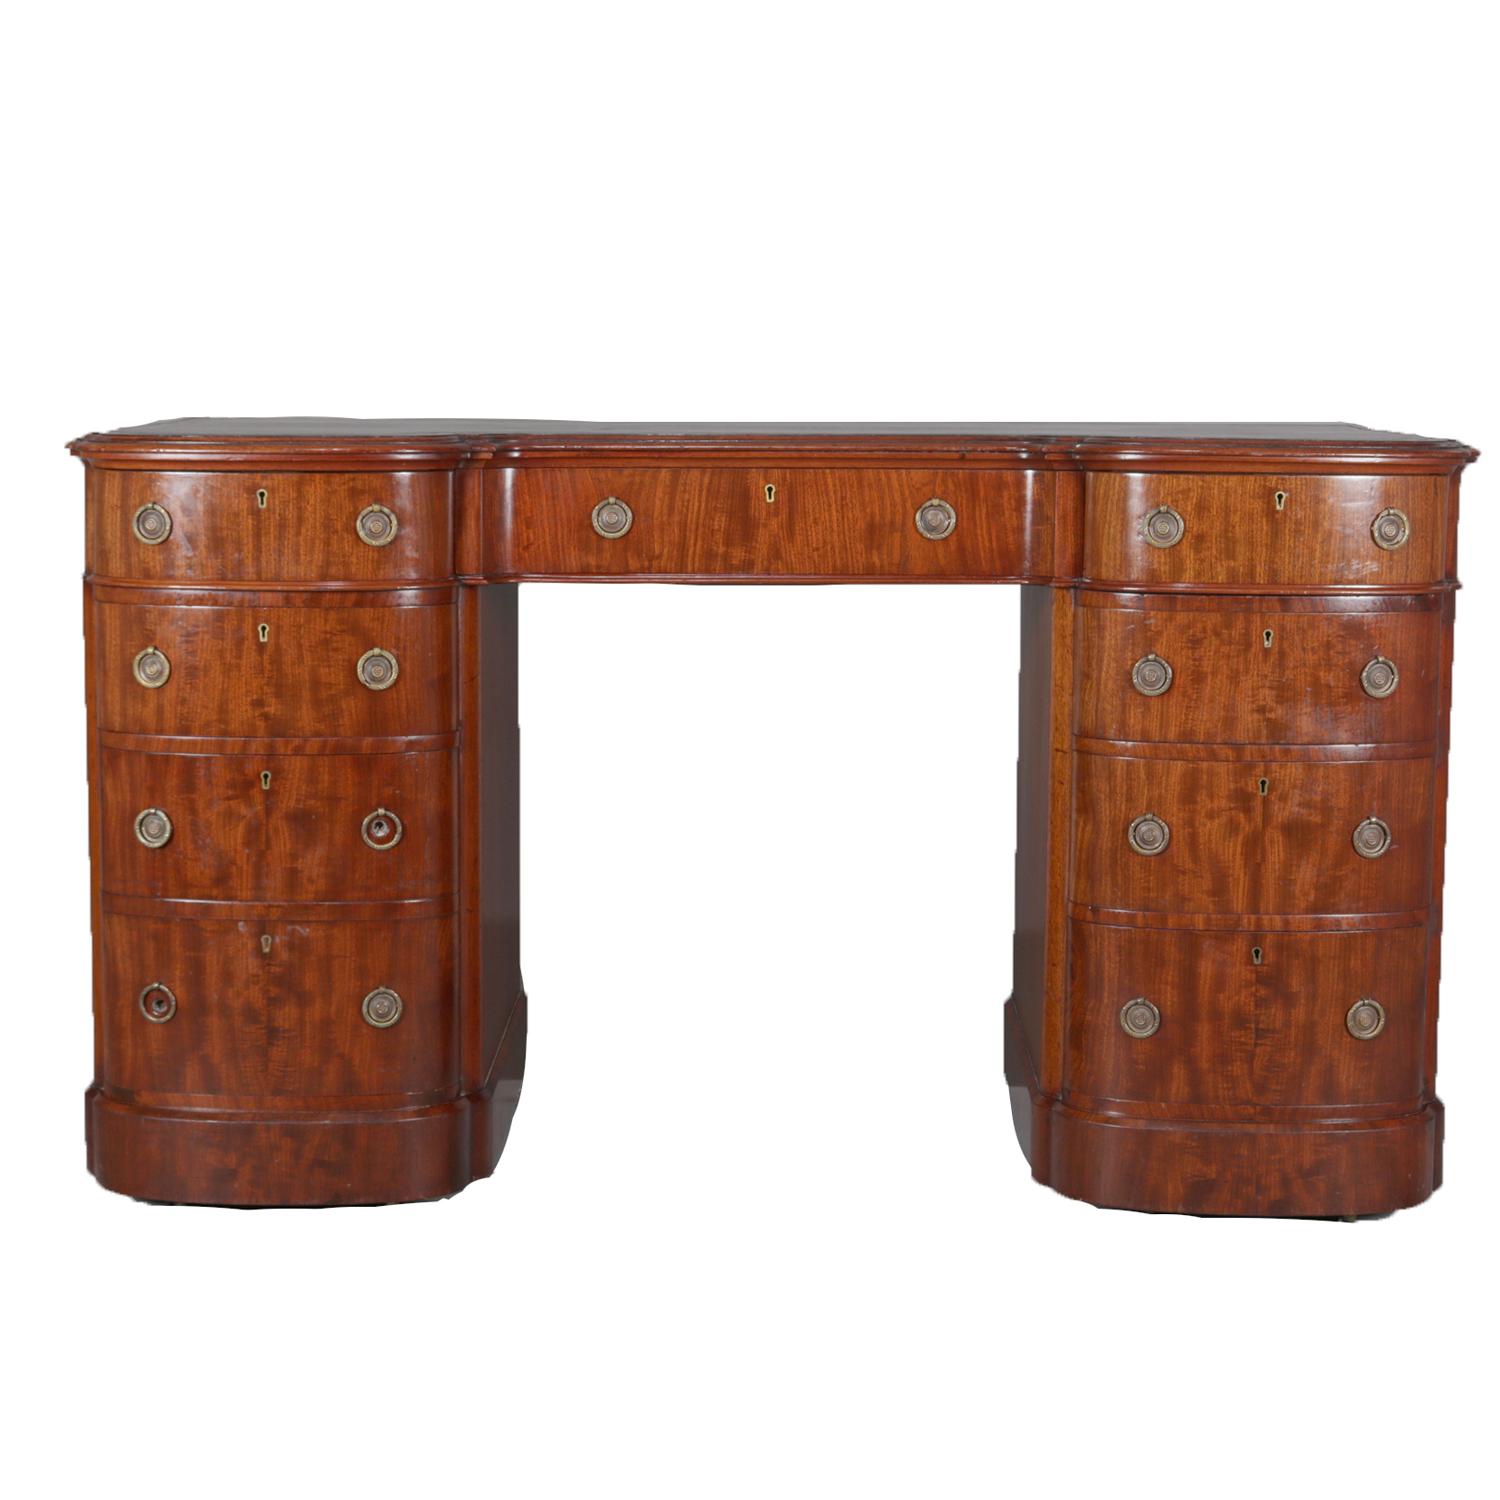 An antique English Regency flame mahogany executive campaign desk featuring knee hole form with gilt decorated leather top writing surface over central drawer with flanking columns each with drawers, cast bronze pulls throughout, circa